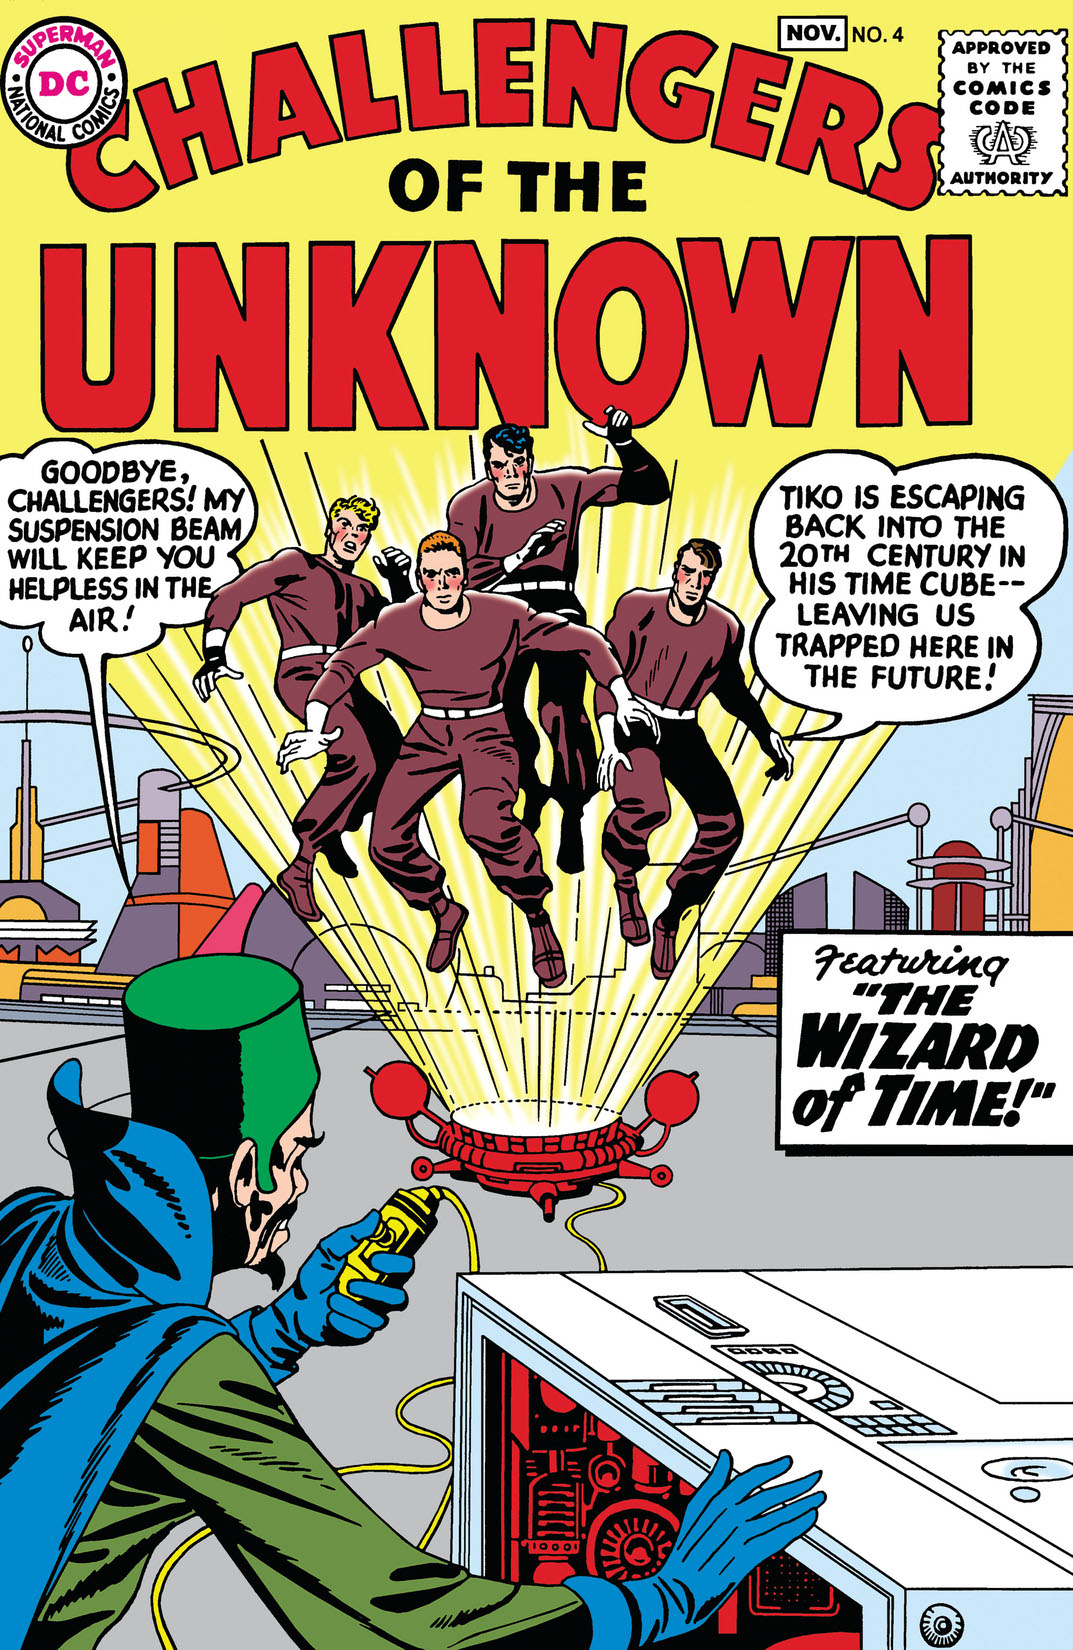 Challengers of the Unknown (1958-) #4 preview images